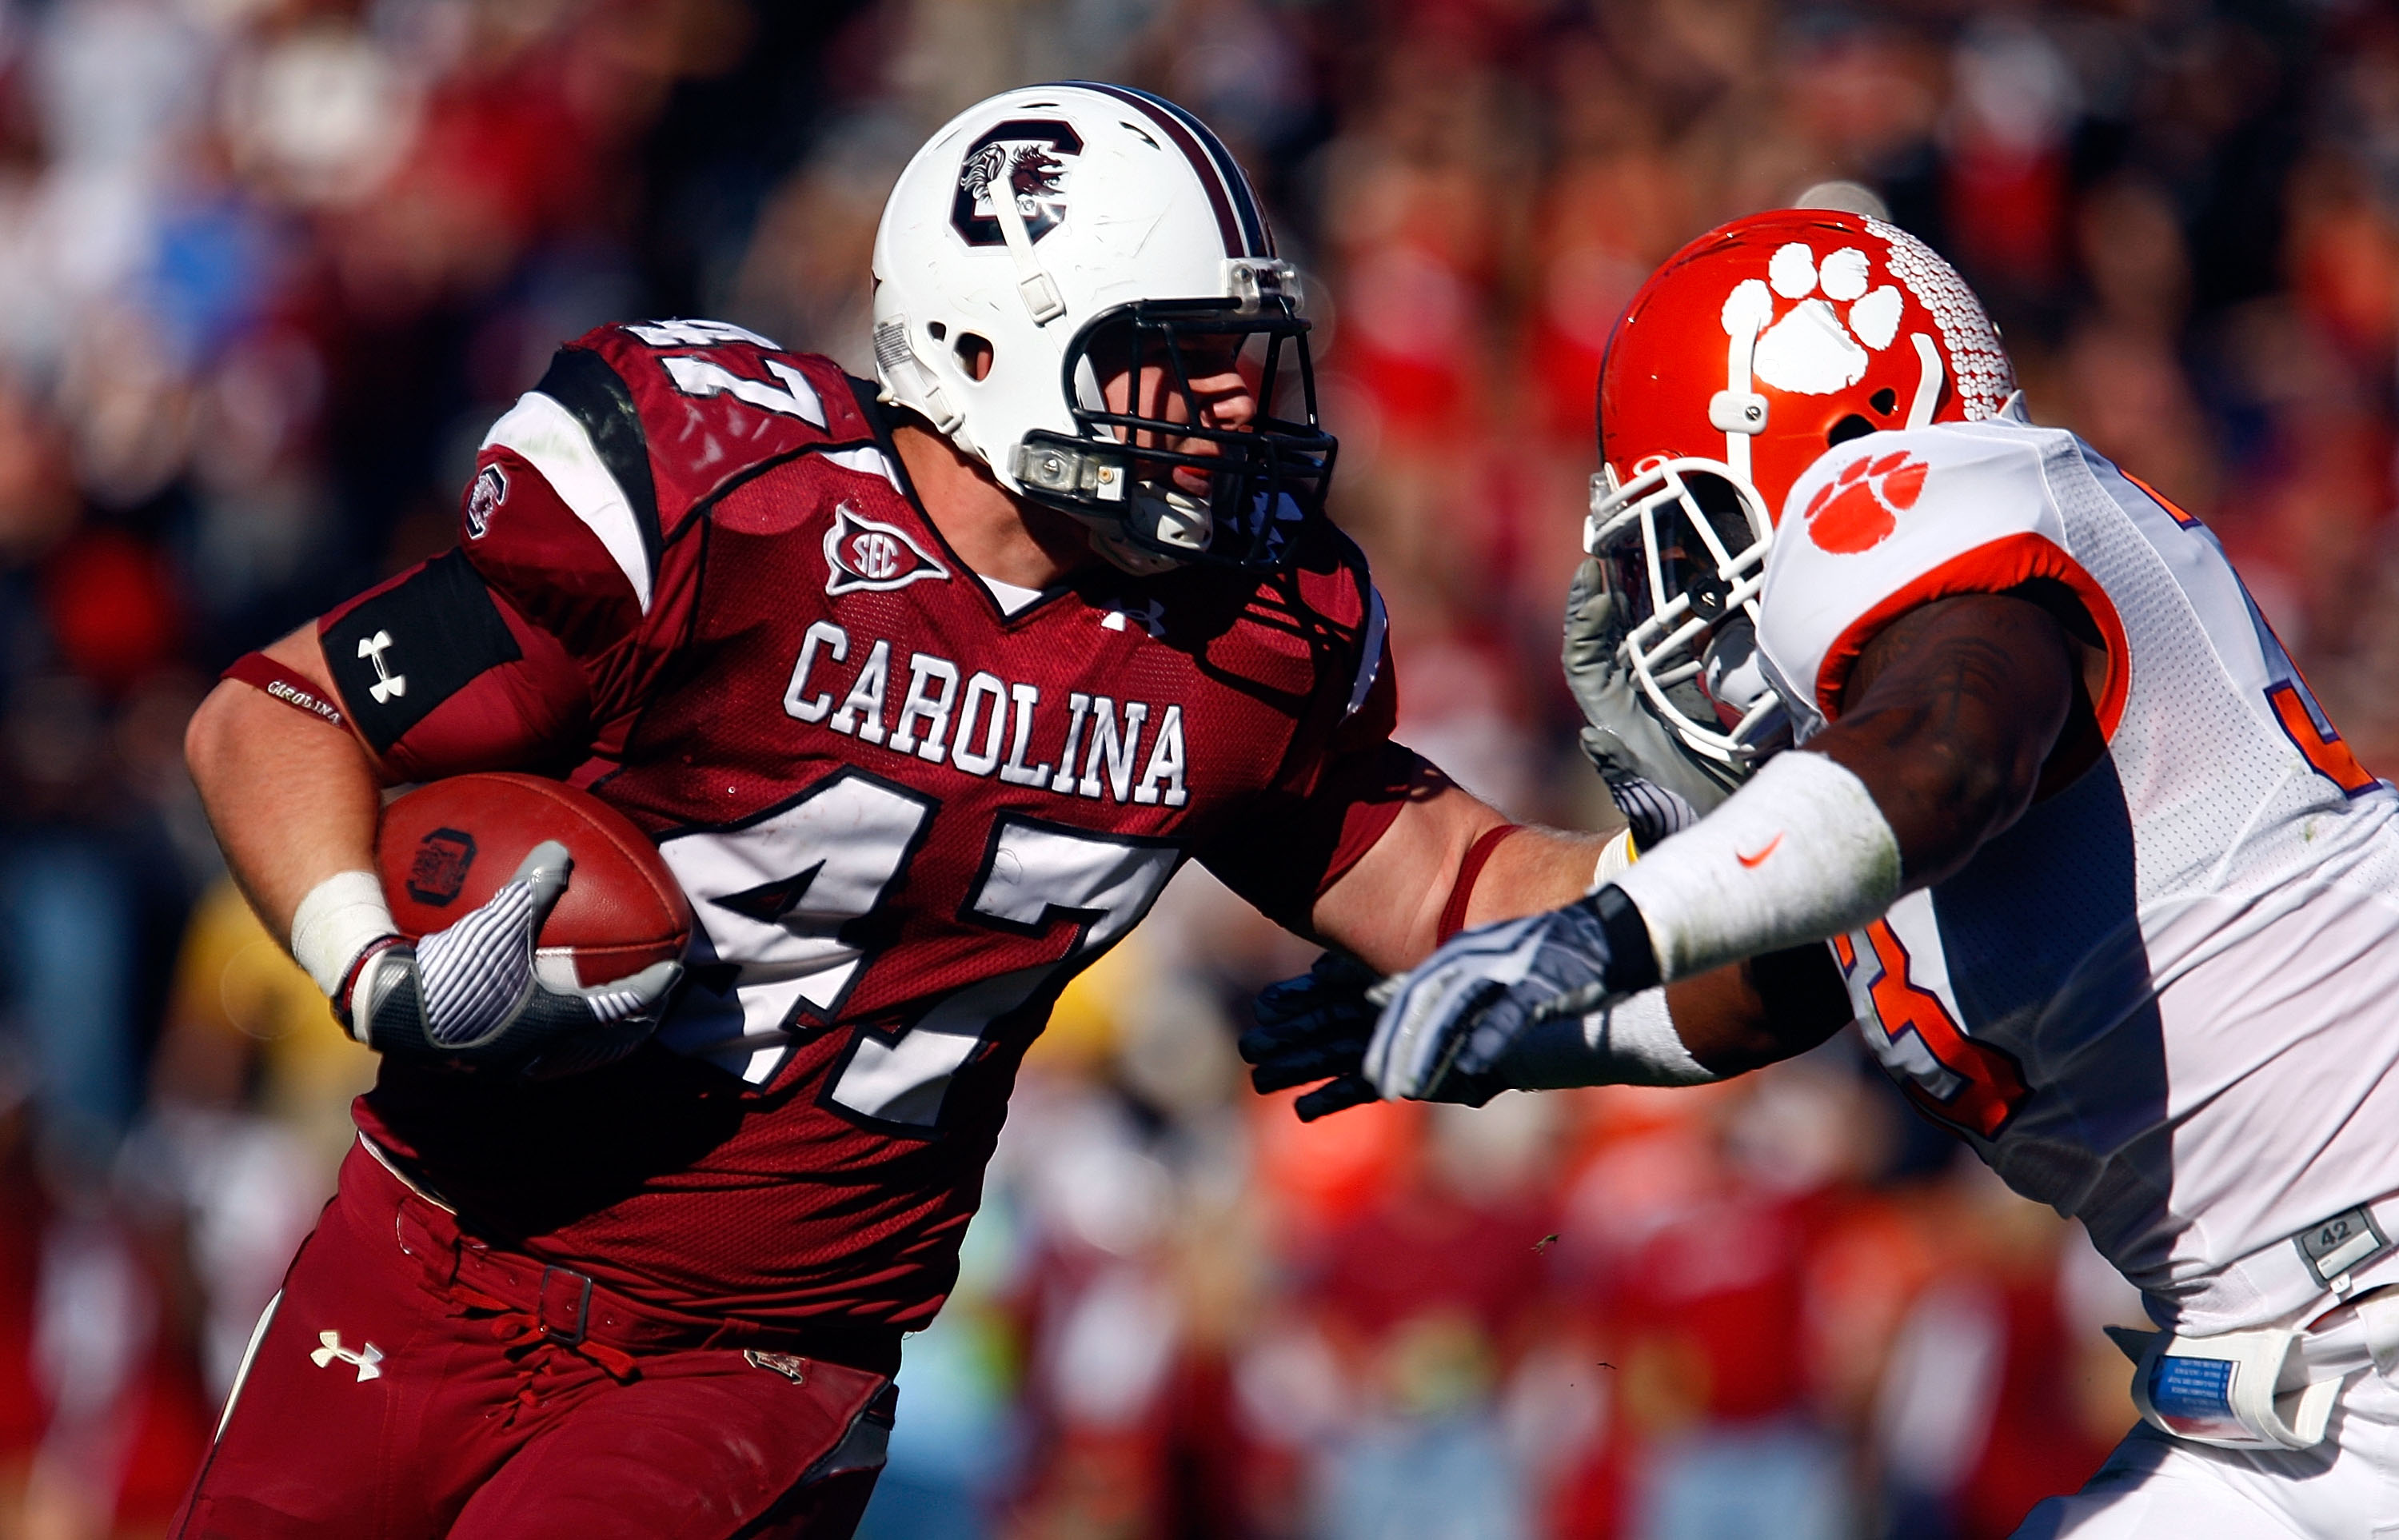 COLUMBIA, SC - NOVEMBER 28:  Patrick DiMarco #47 of the South Carolina Gamecocks fights off the tackle of Kavell Conner #33 of the Clemson Tigers at Williams-Brice Stadium on November 28, 2009 in Columbia, South Carolina.  (Photo by Scott Halleran/Getty I